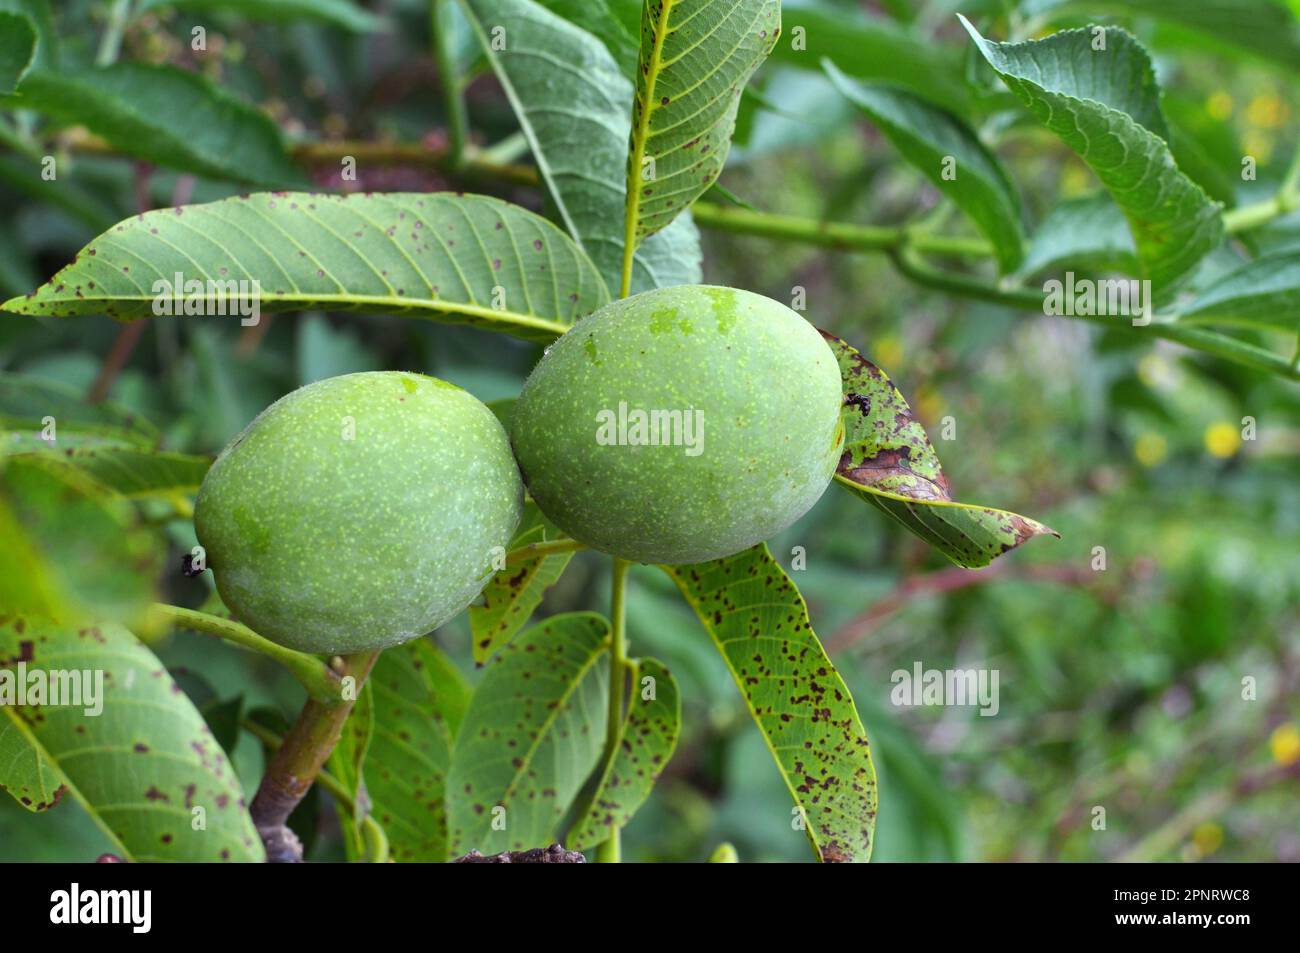 On a tree branch with a green shell, a ripening walnut Stock Photo